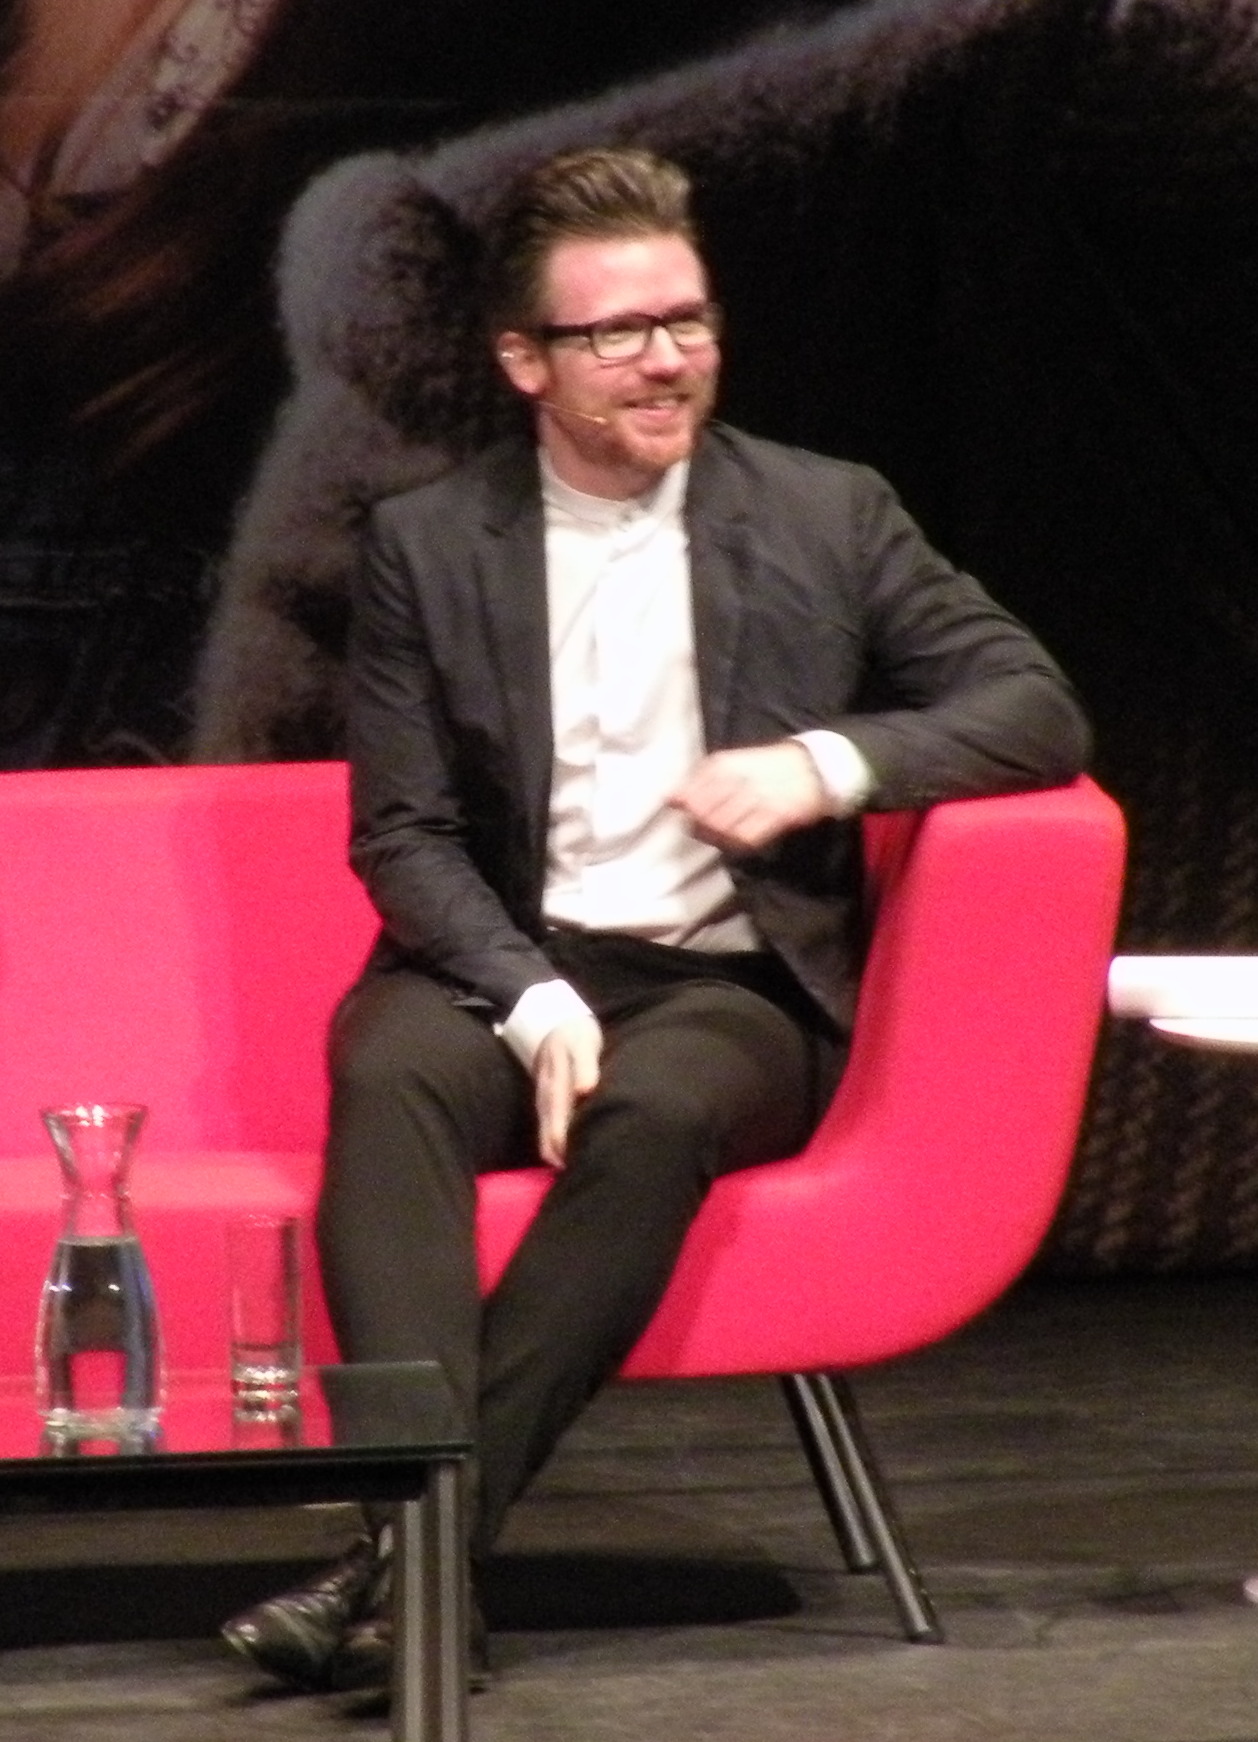 MacRae at a ''[[Doctor Who]]'' [[Doctor Who fandom#Conventions|convention]] in March 2012